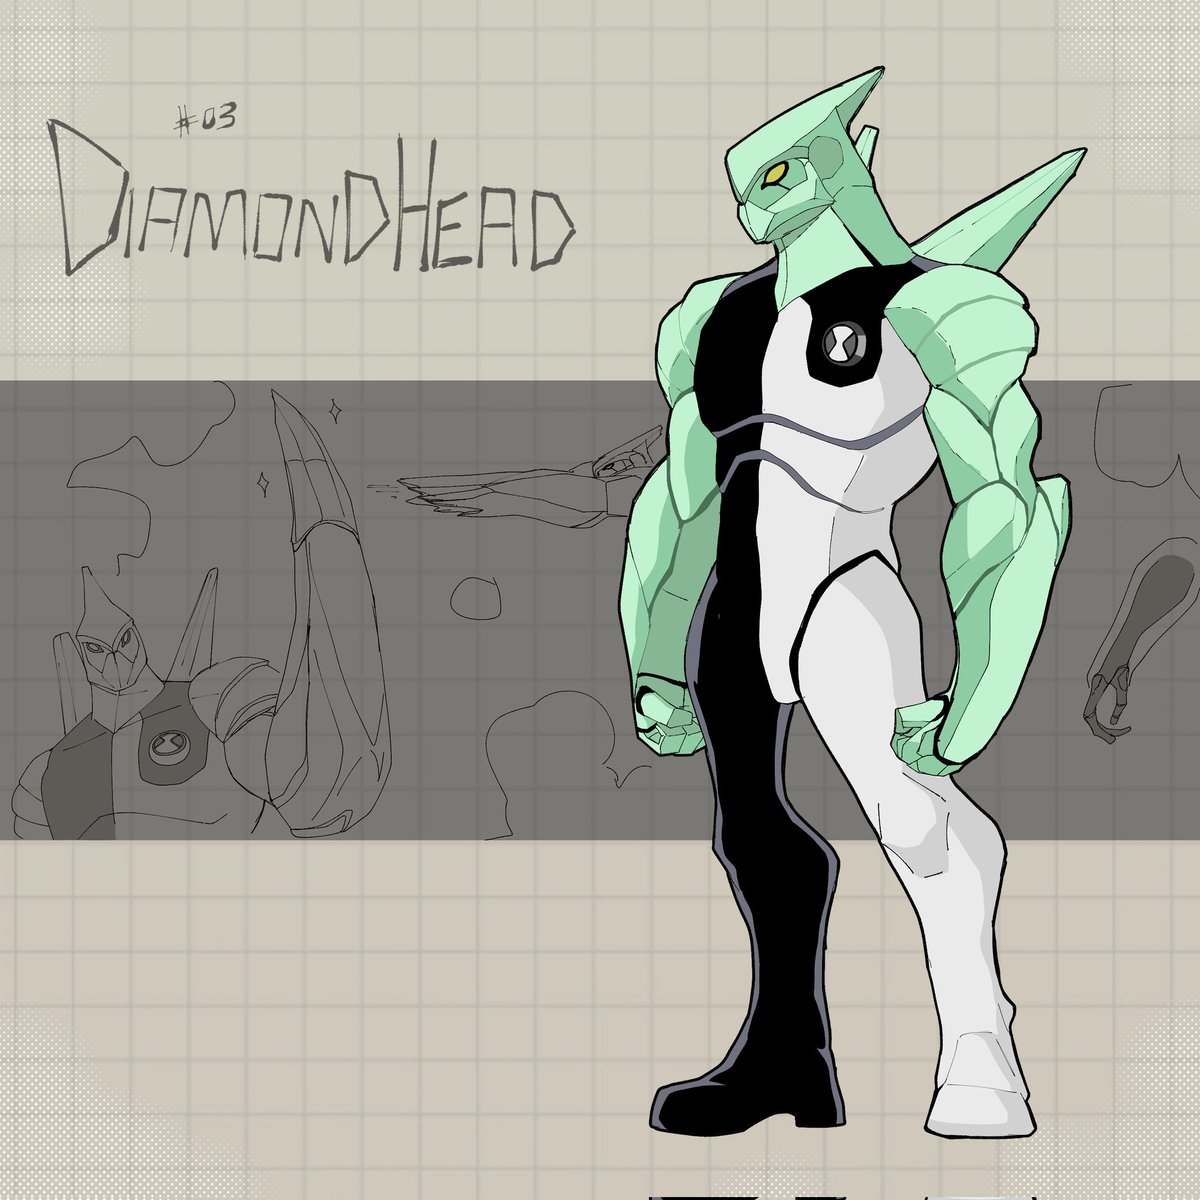 Diamondhead.
He isn't made entirely out of 'diamonds' instead it is an exoskeleton that protects his inner body.
He is incredibly durable and can withstand most attacks except sound.
He can manipulate this exoskeleton and shape it to whatever he wants